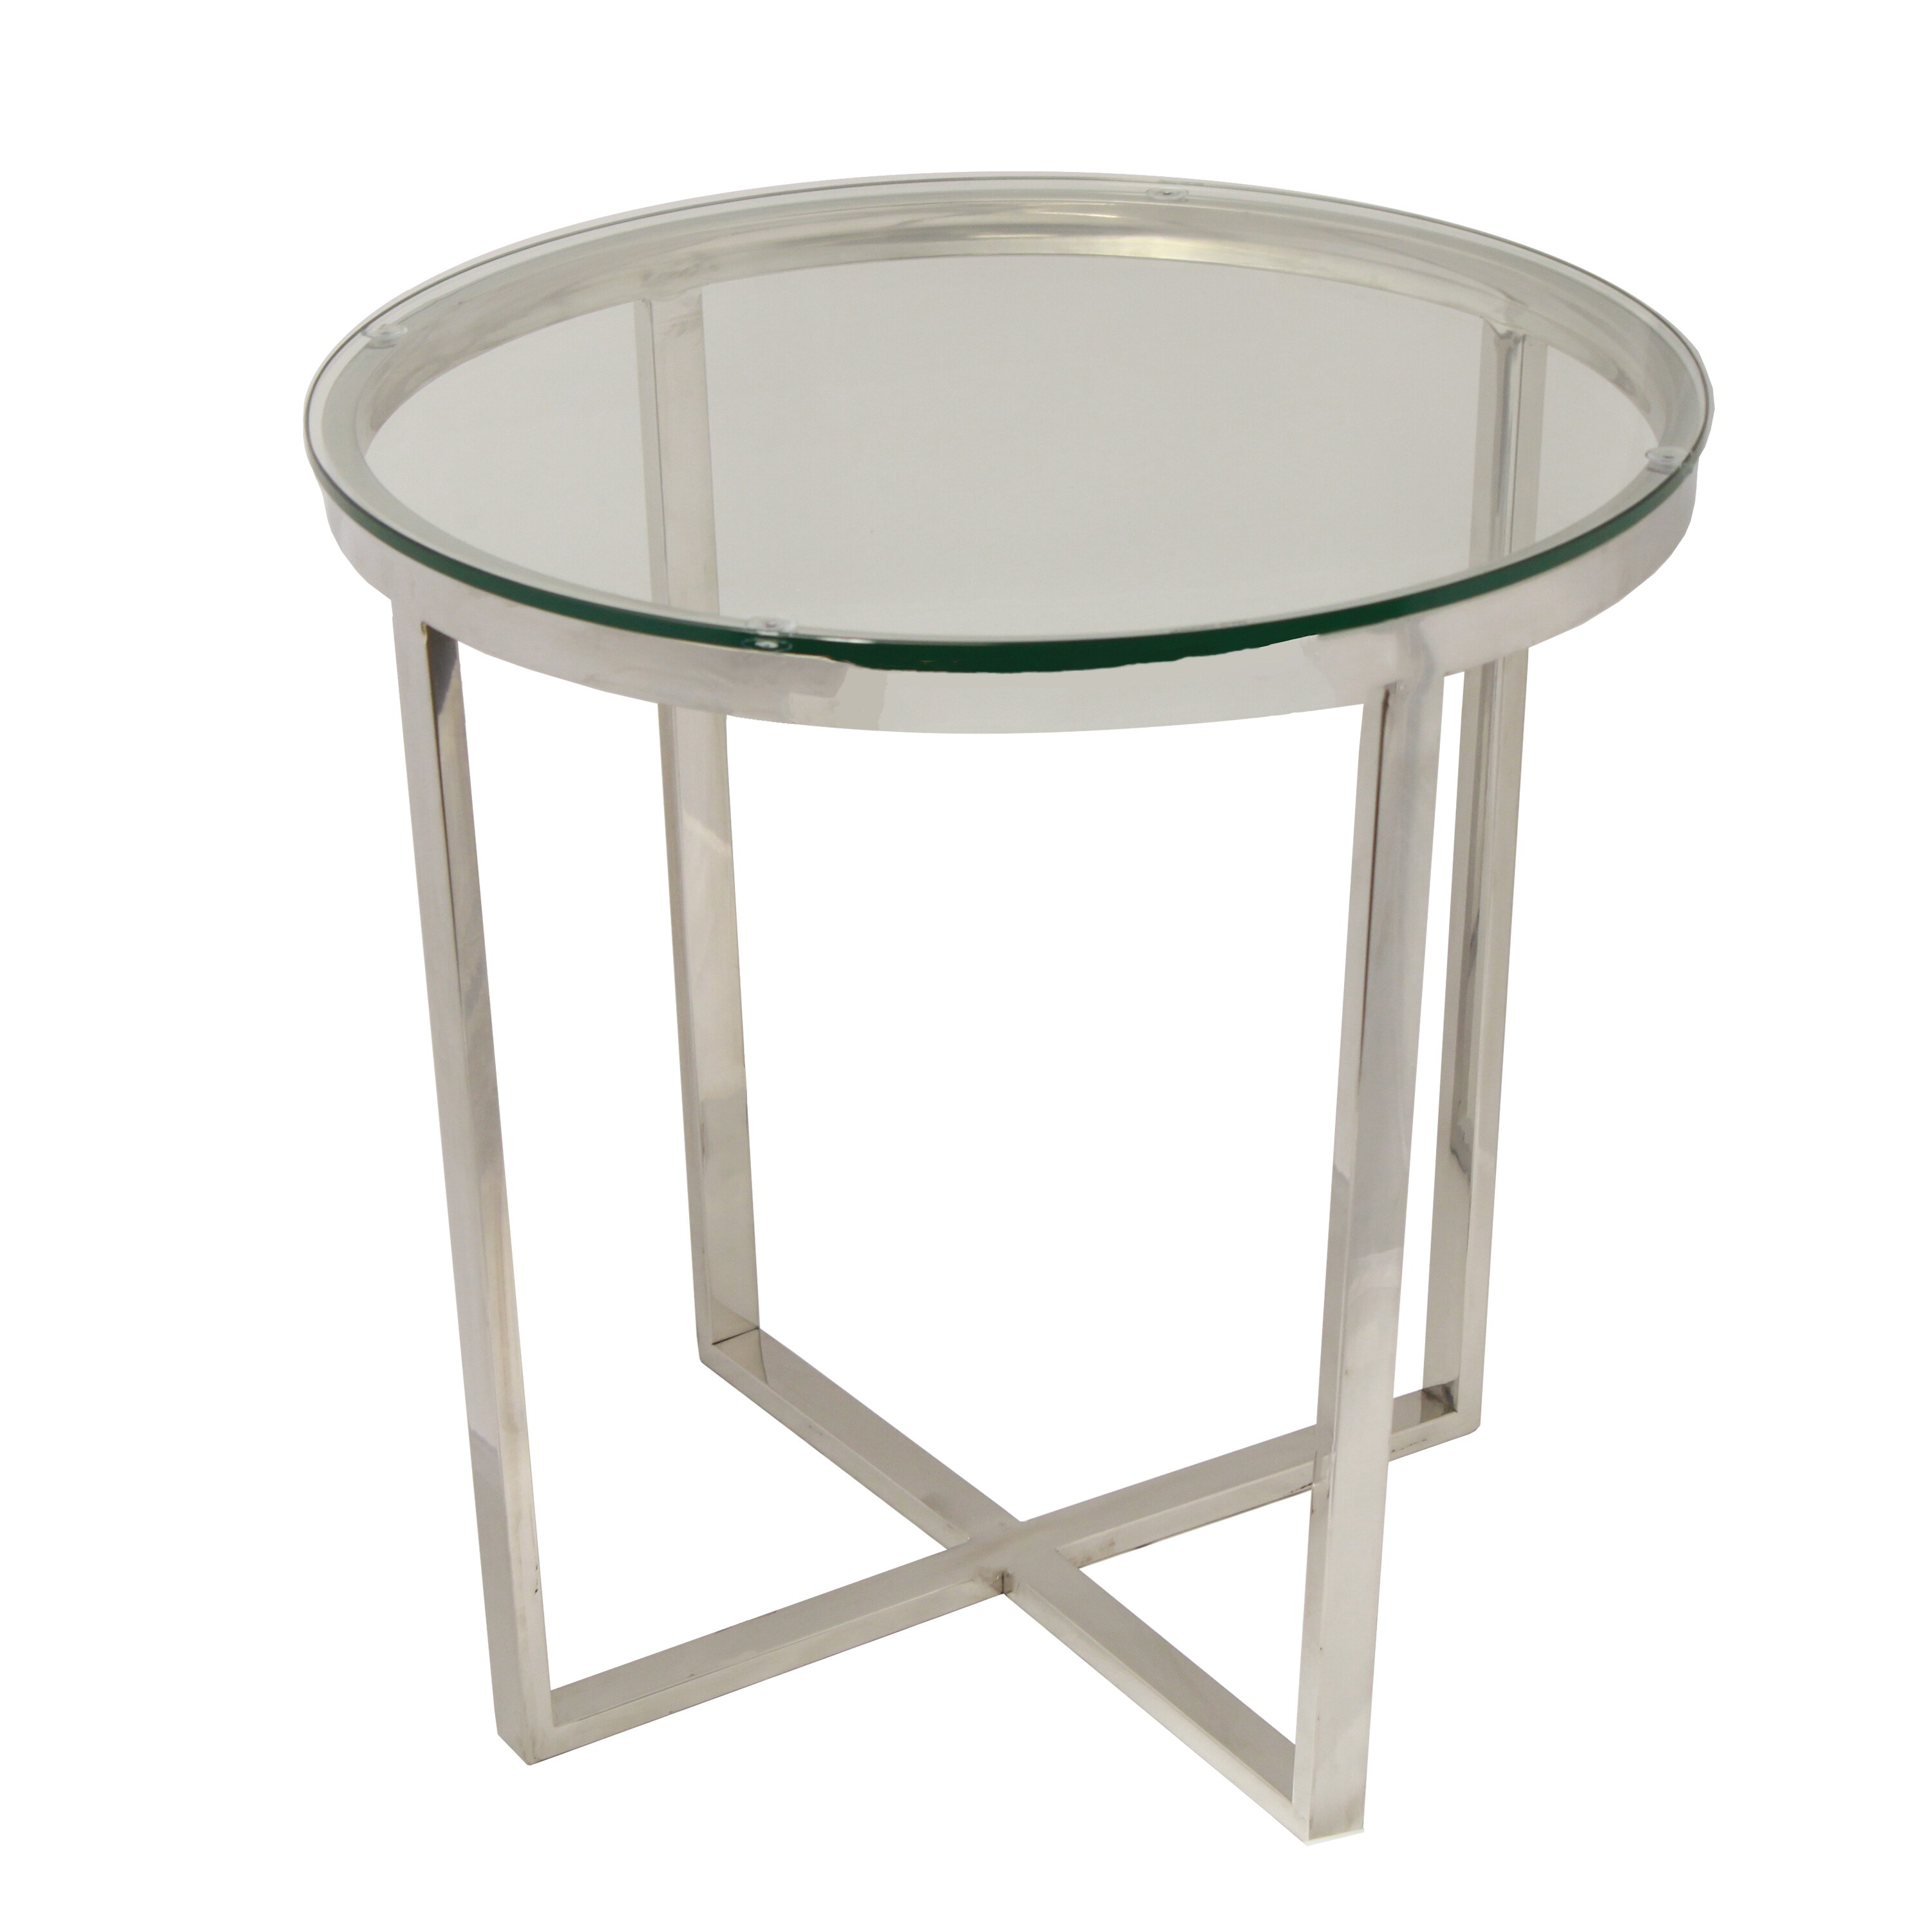 Urban Designs Round Glass Metal Accent And End Table   18618053